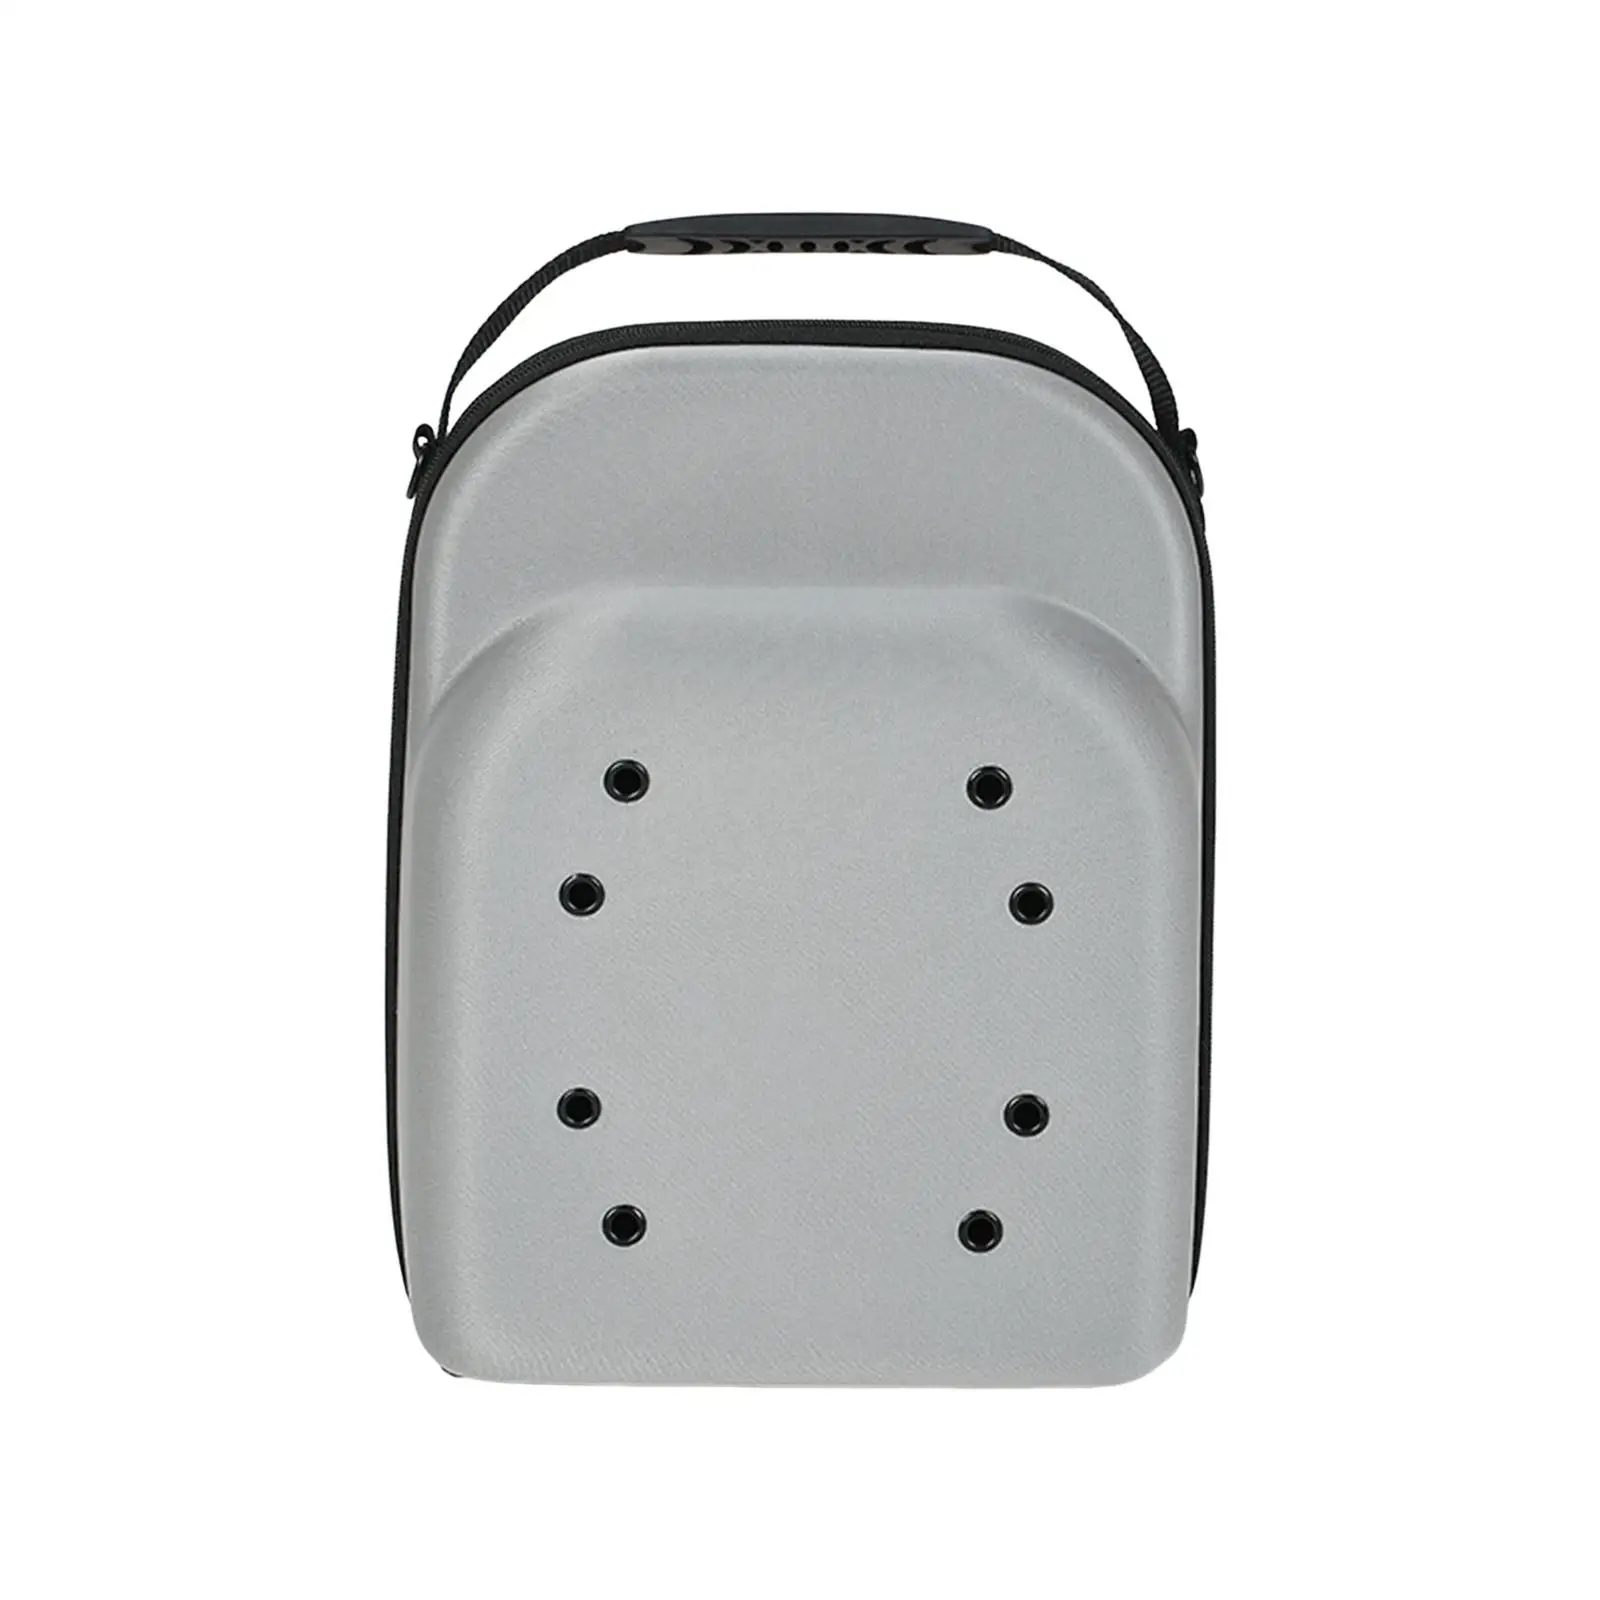 Hard Hat Case Storage Carrier Box Cap Carrying Bag Suitcase Cap Carrier with Carrying Handle for Travel Household Men Women